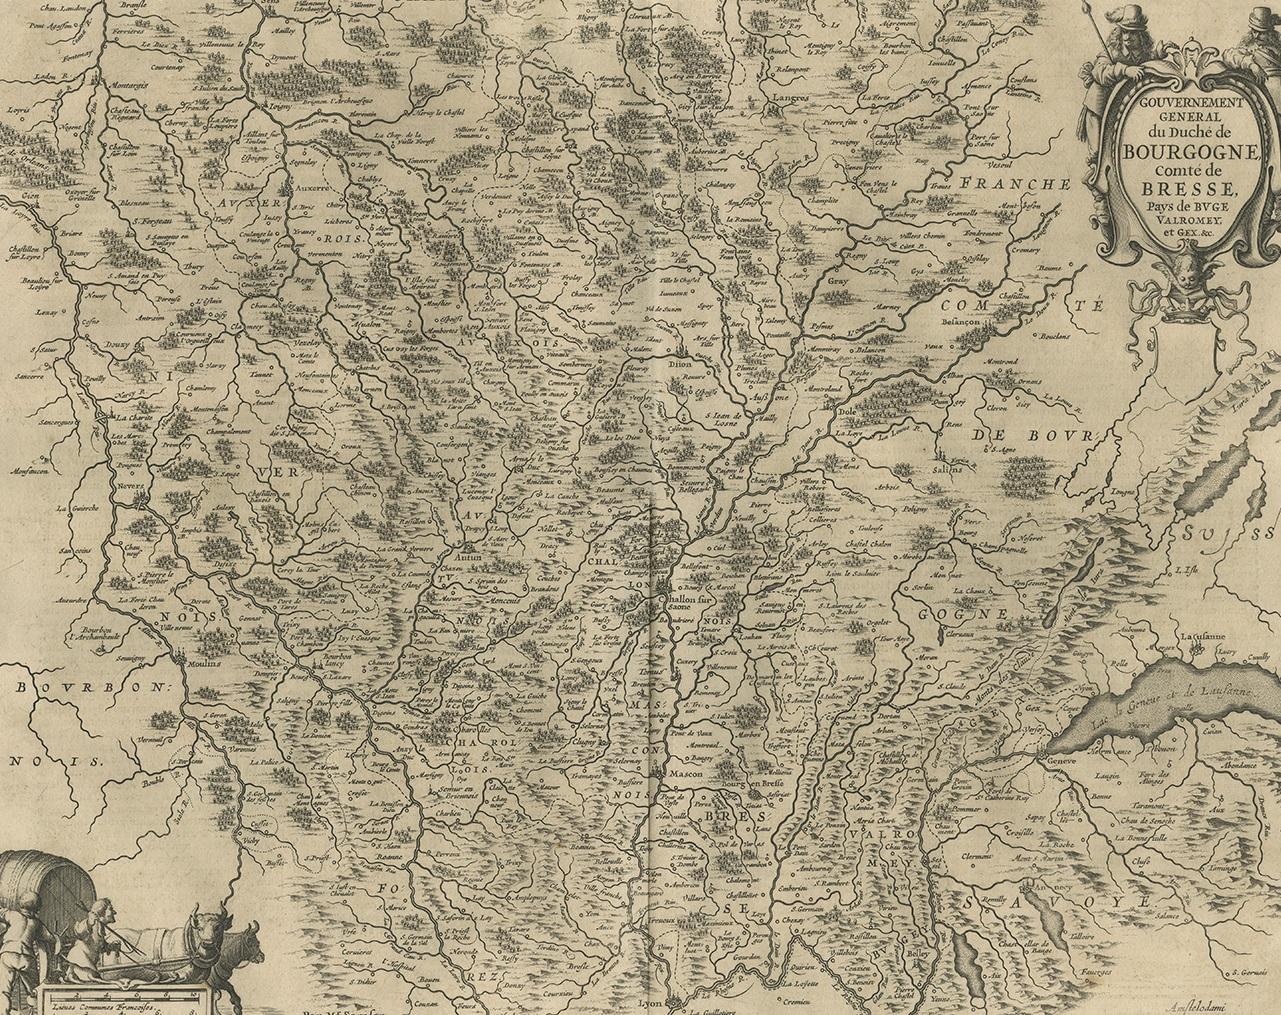 Antique map 'Gouvernement General du Duche de Bourgogne comté de Bresse'. Decorative map of the Burgundy region roughly between Langres, Geneva, Lyon and Nevers. Fully engraved to show rivers, mountains, forests and cities. Title cartouche flanked